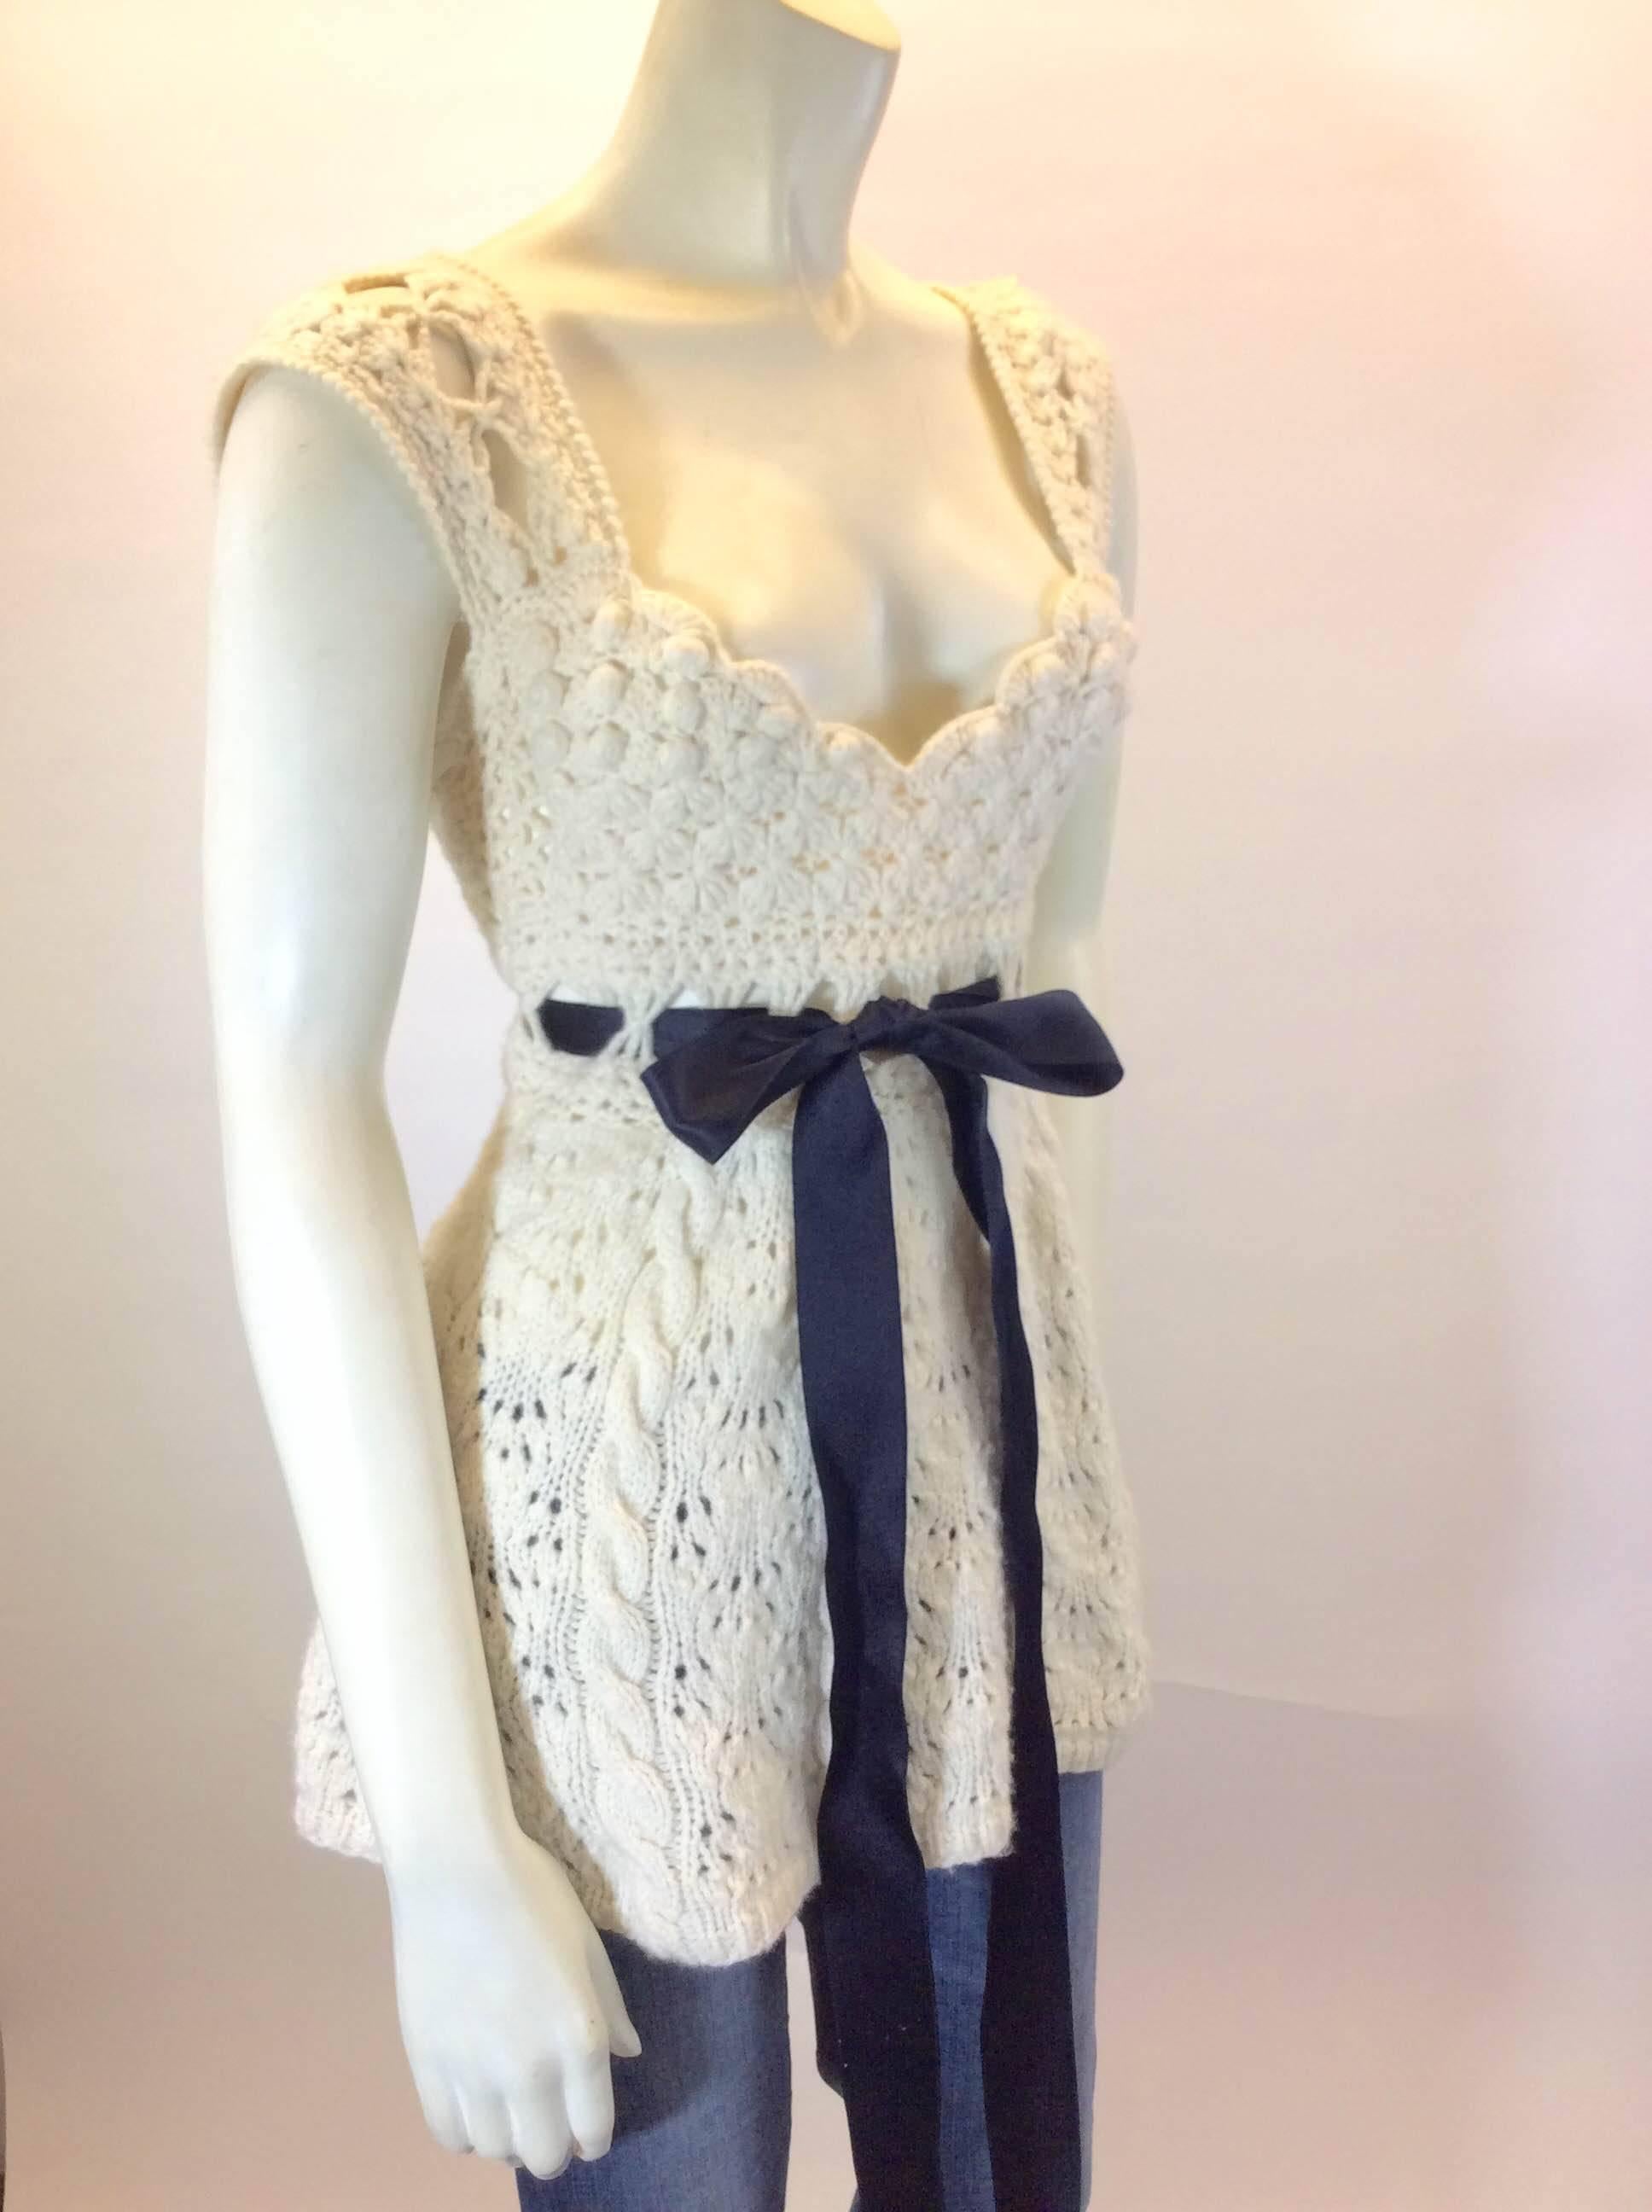 Ivory Cable Knit/Open Embroidery 
100% Cashmere
Black Velvet Ribbon Belt
Intricate Knitting on Bust and Back
97